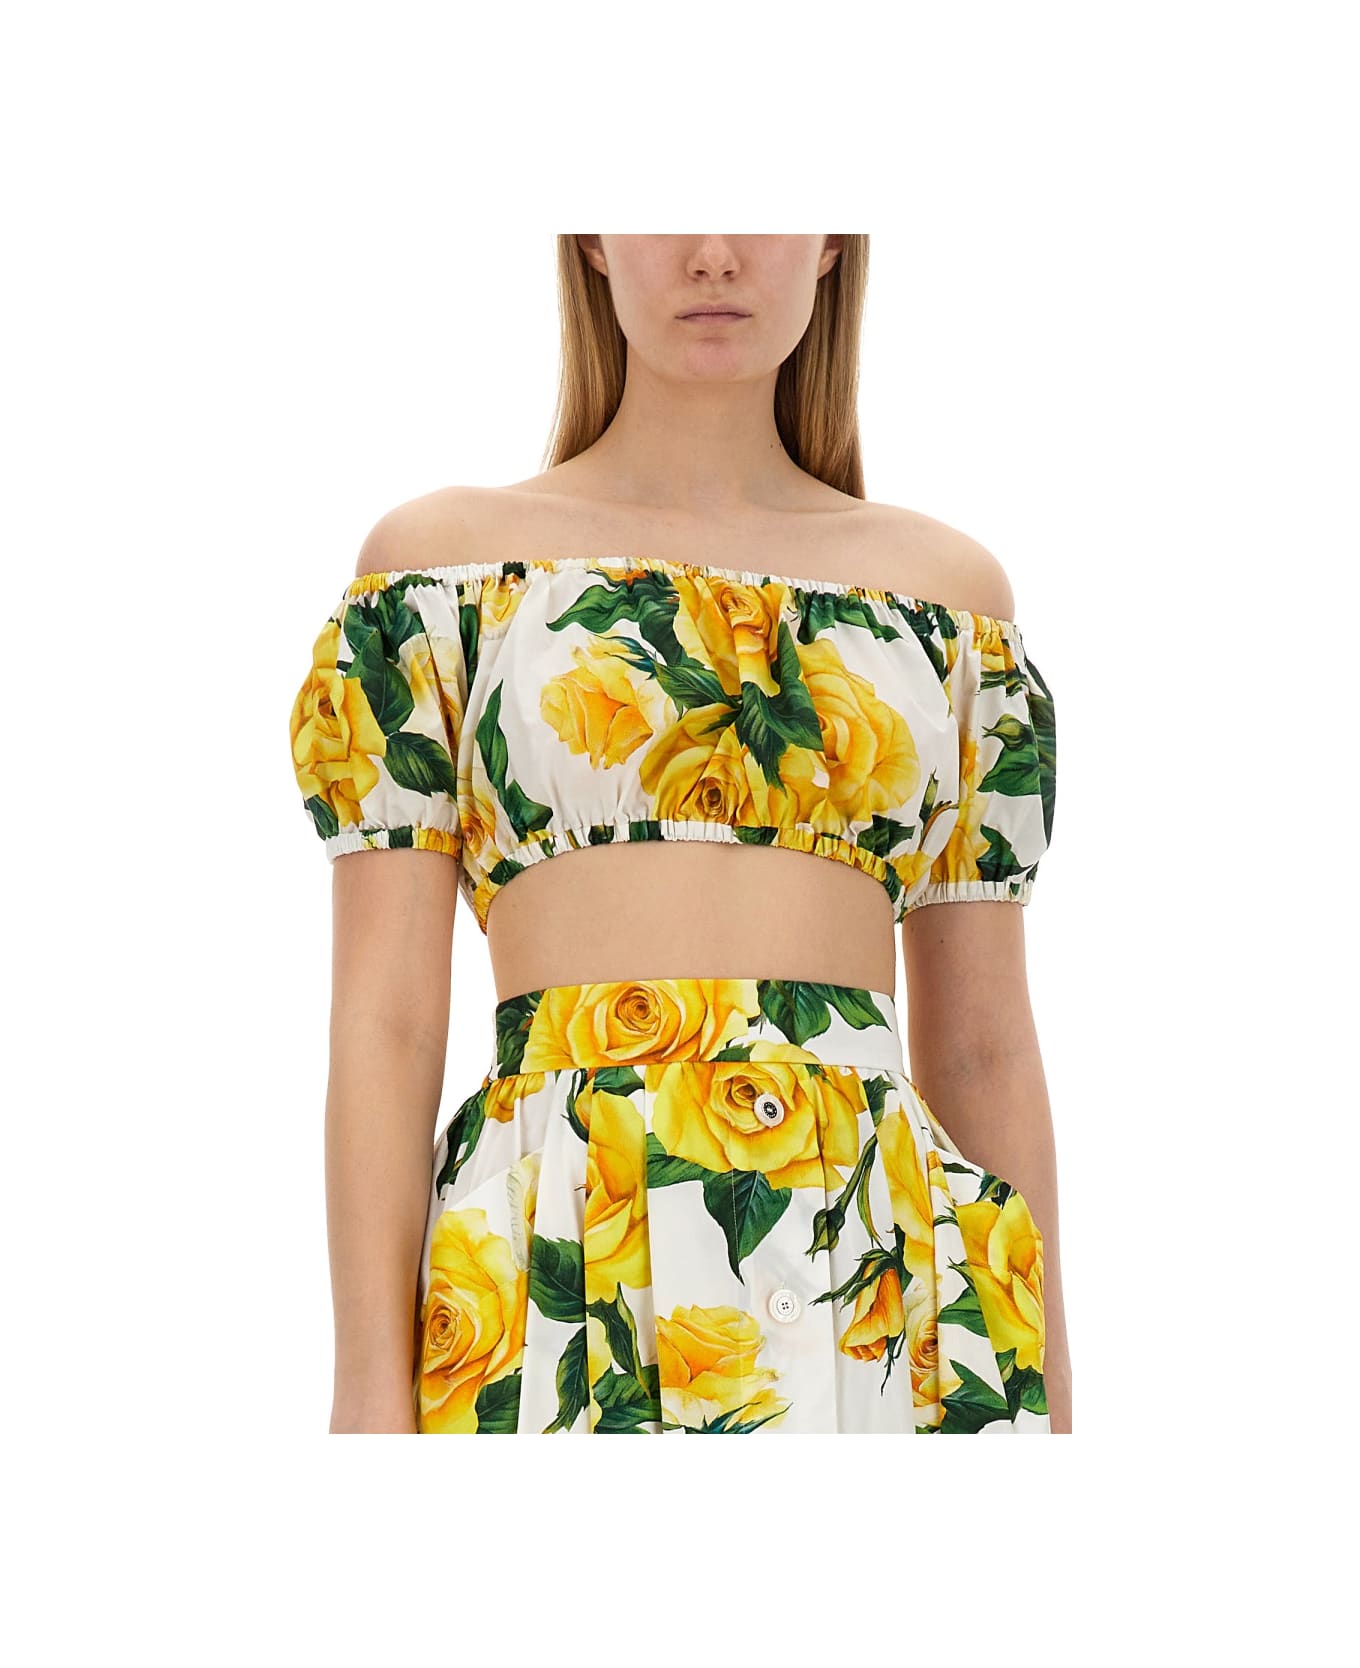 Dolce & Gabbana Crop Top With Floral Print - MULTICOLOUR